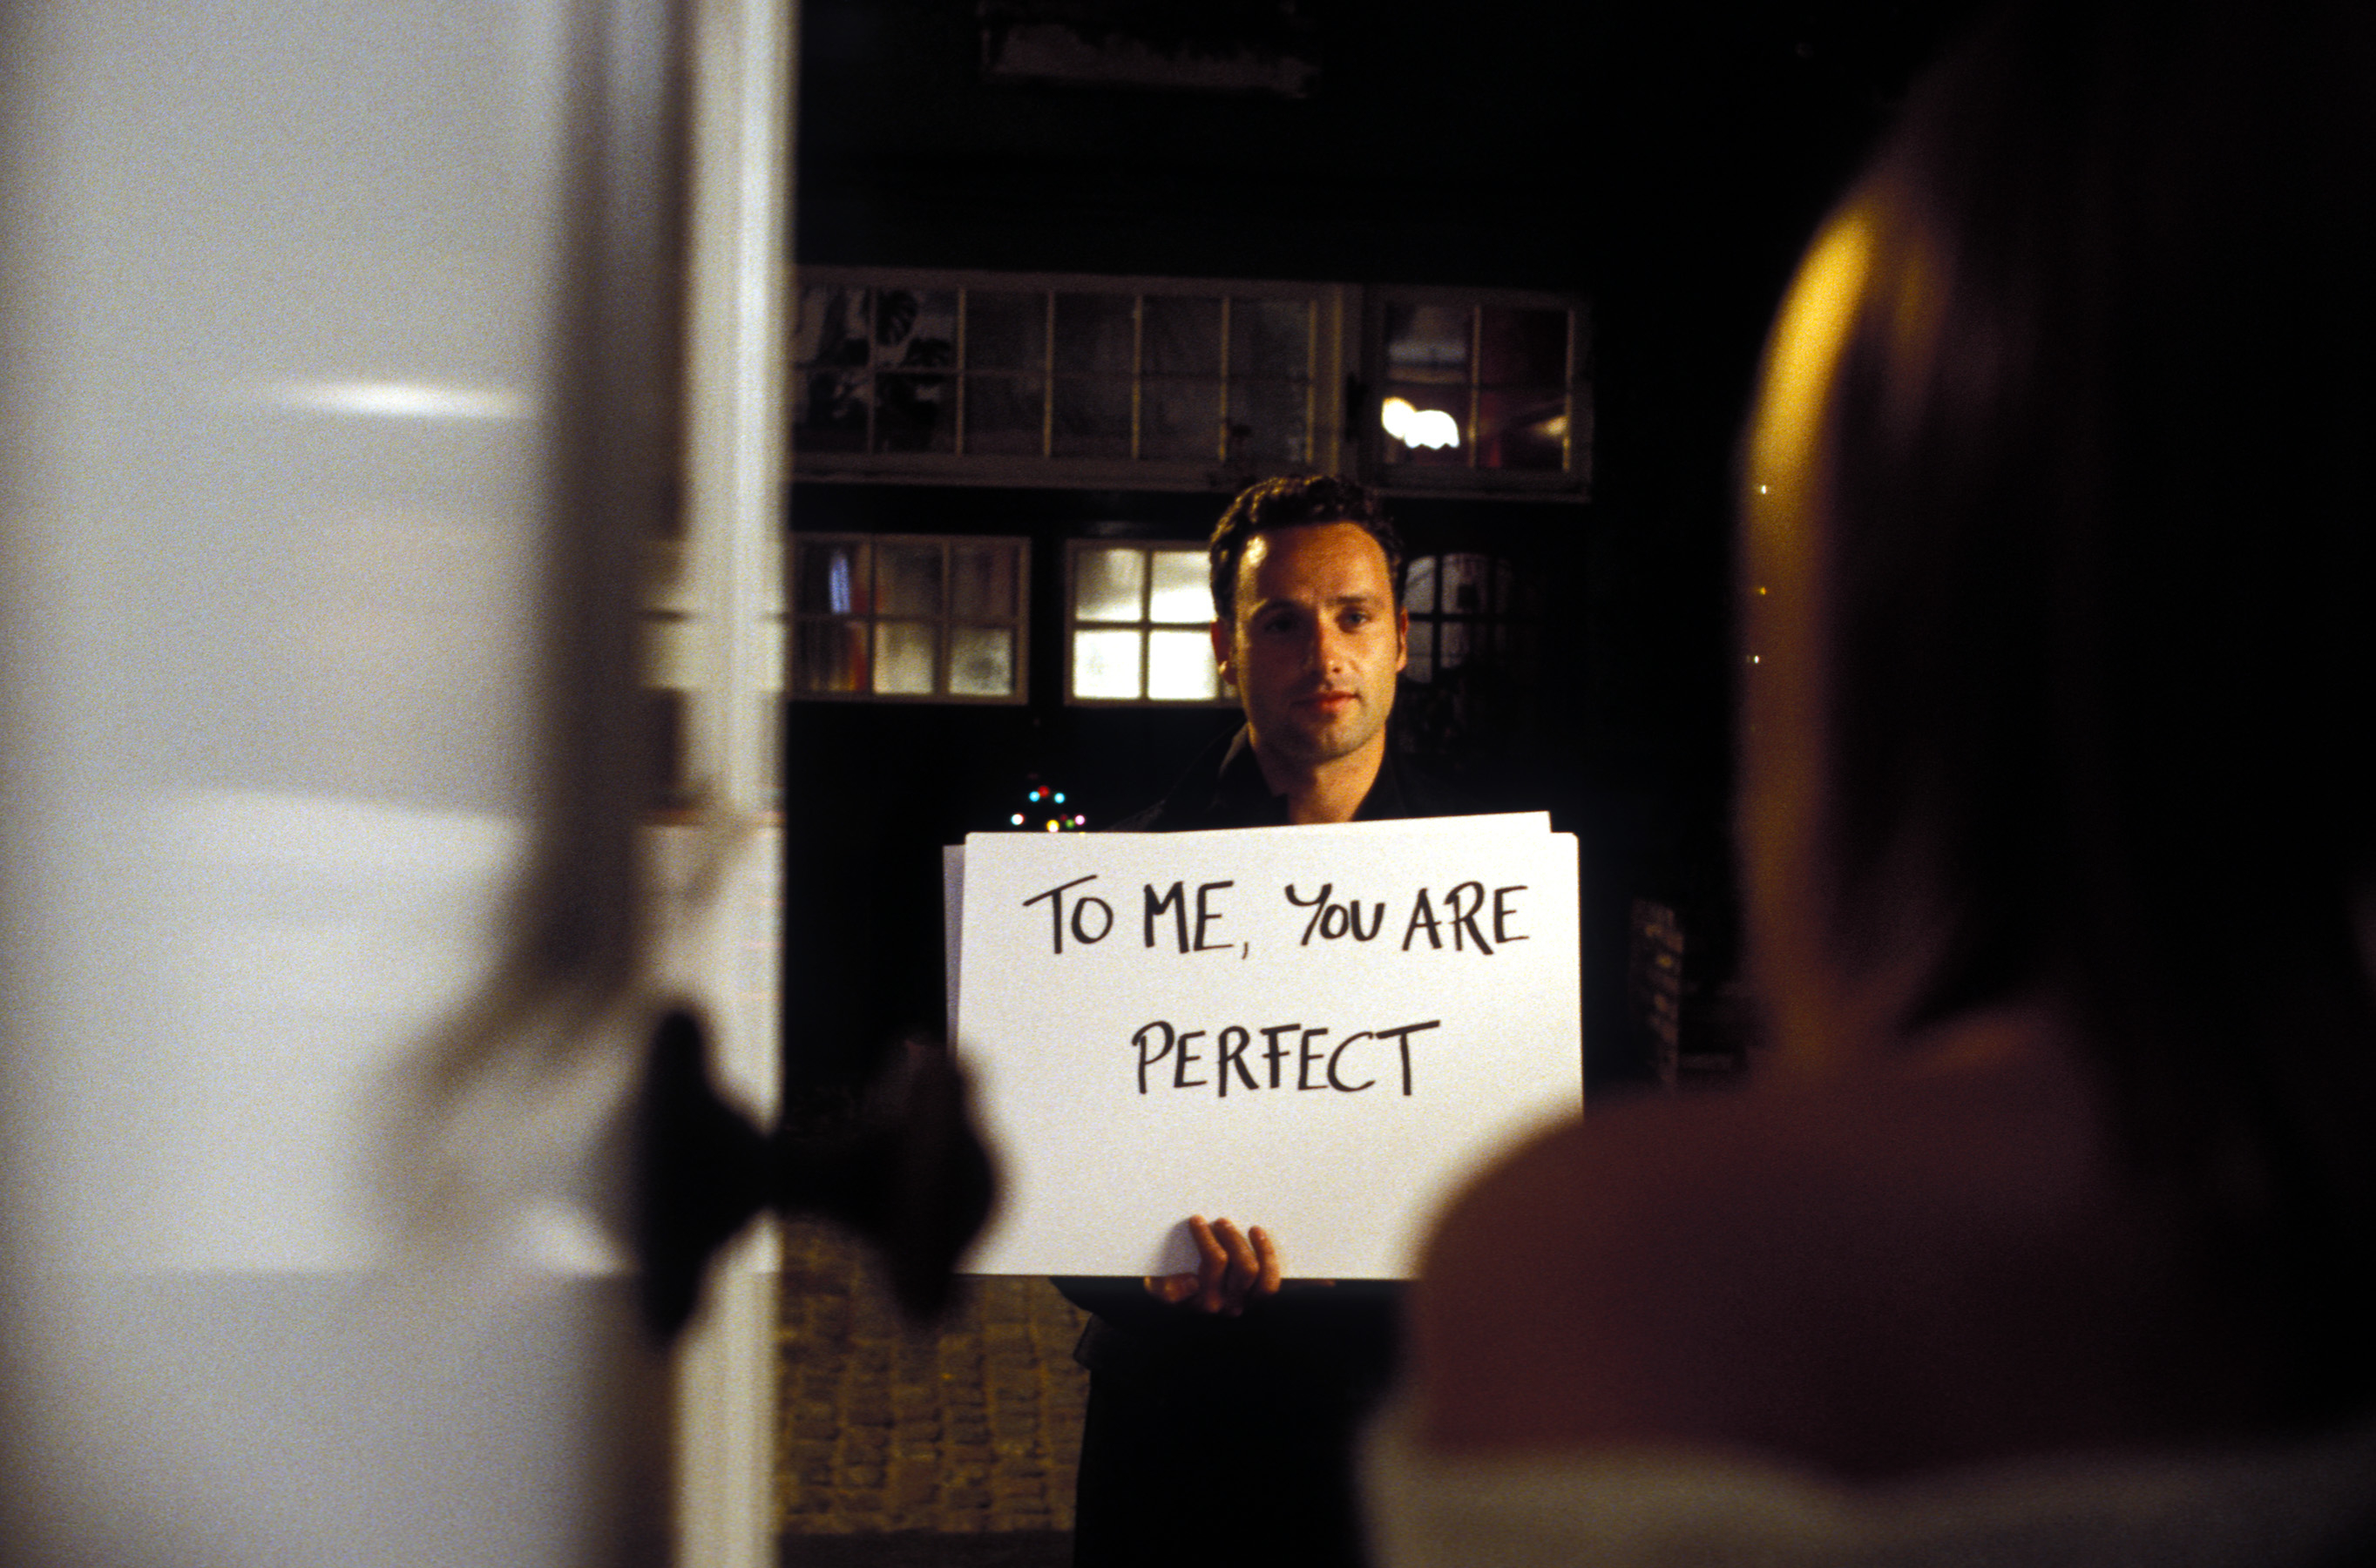 Screenshot from &quot;Love Actually&quot;